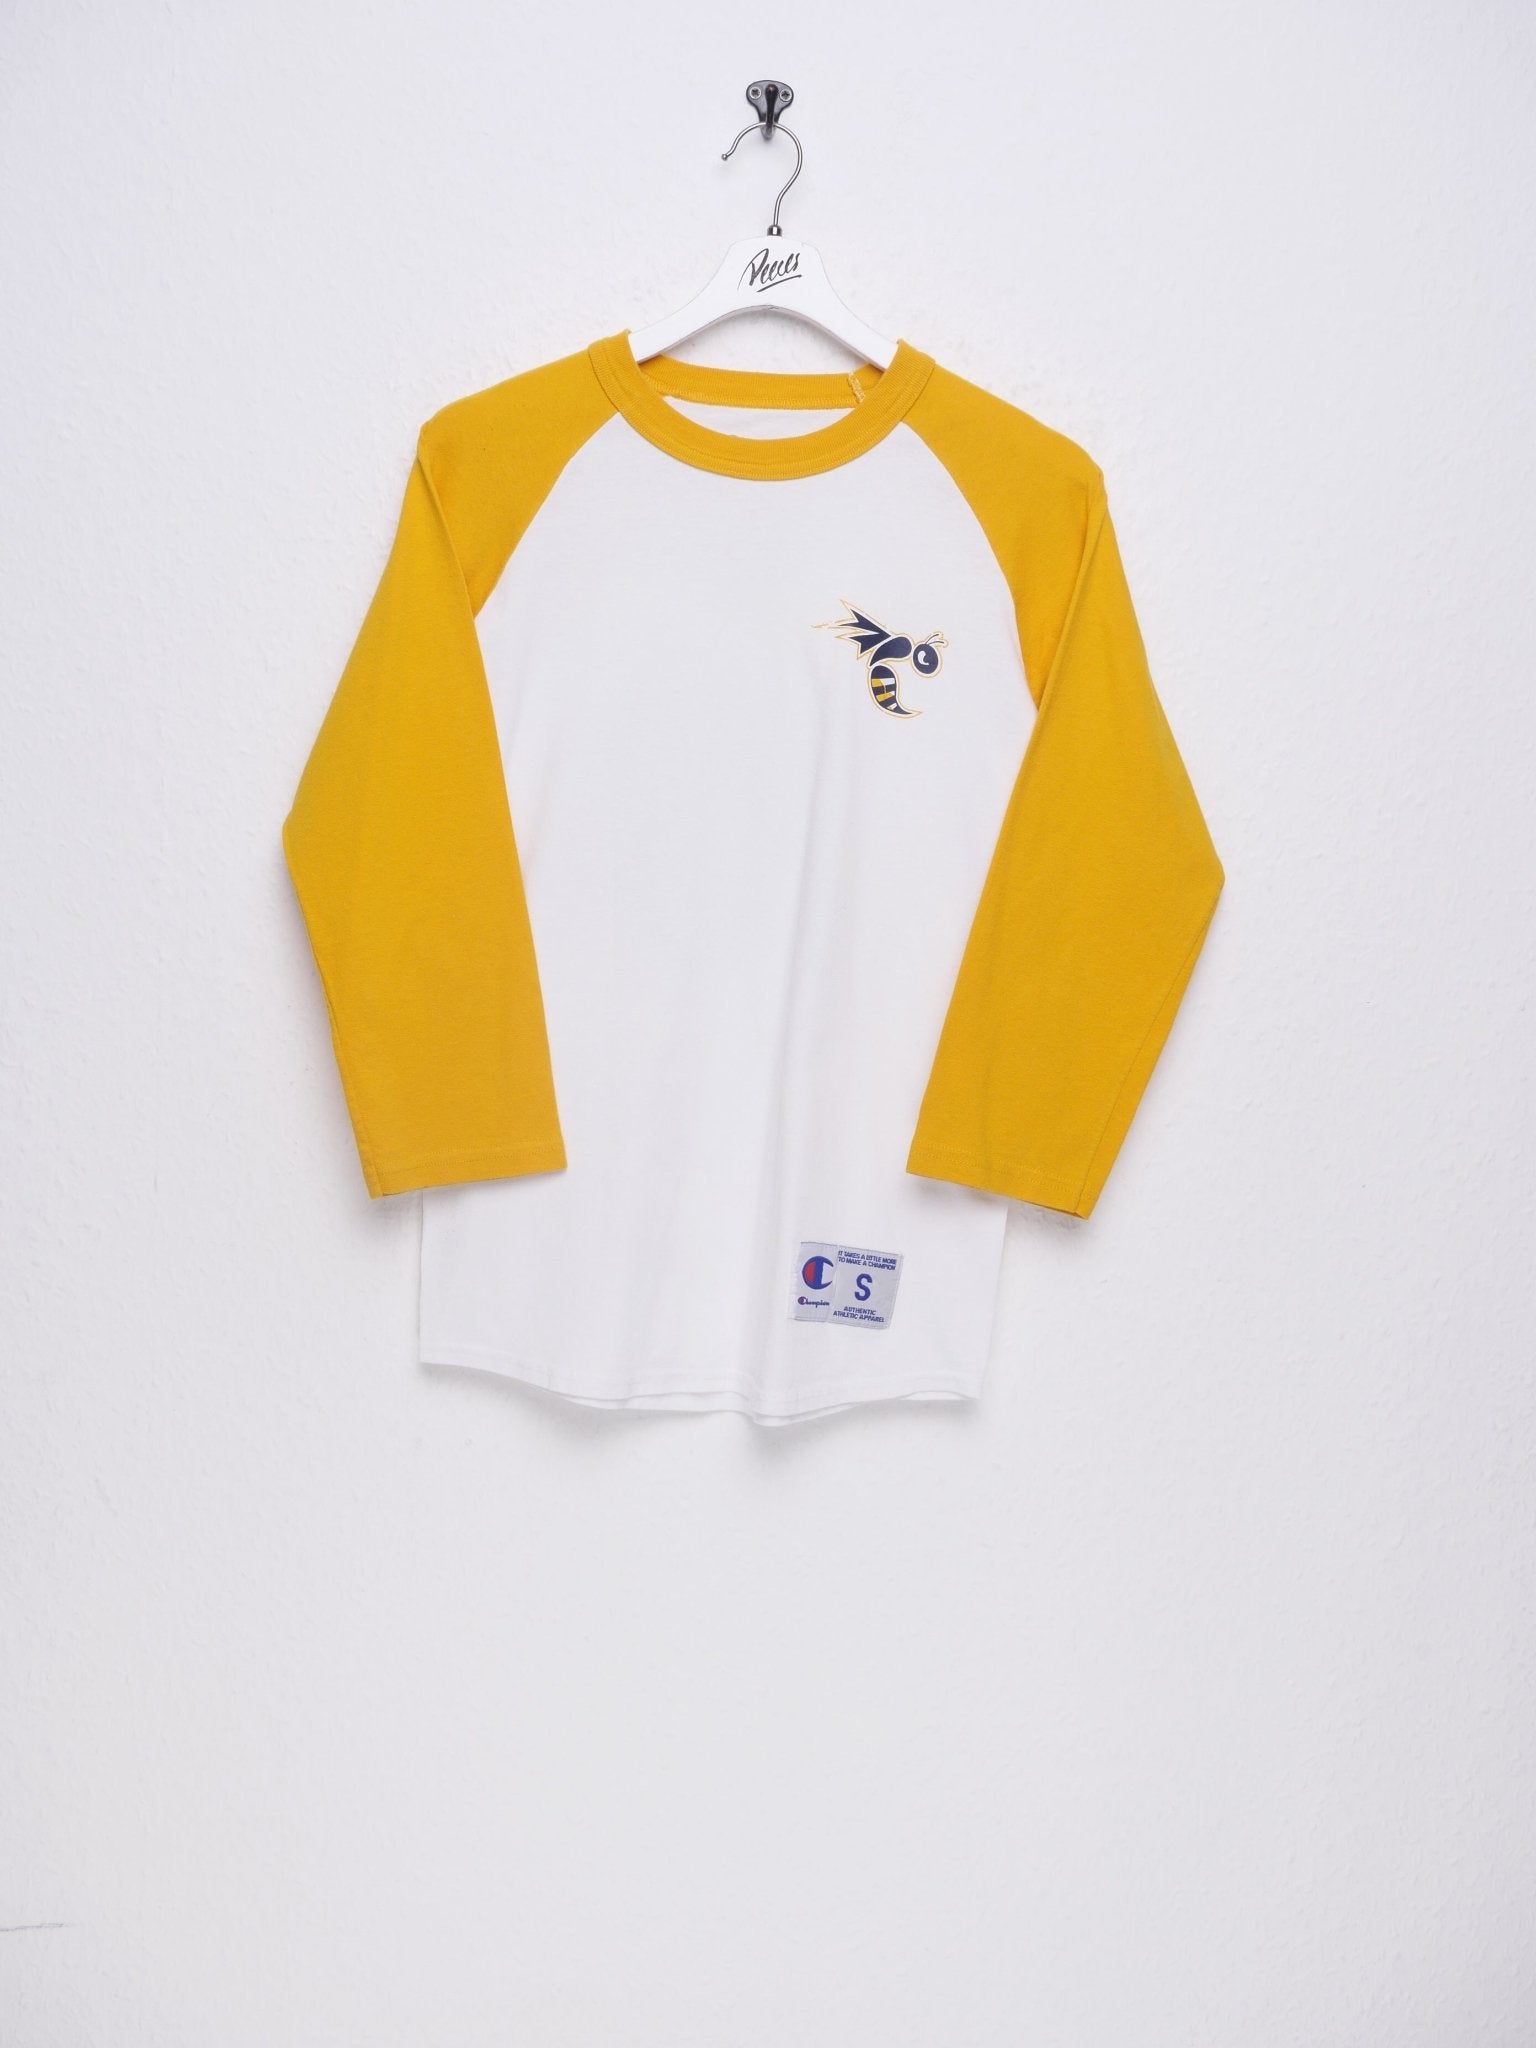 Champion patched Logo two toned College Shirt - Peeces